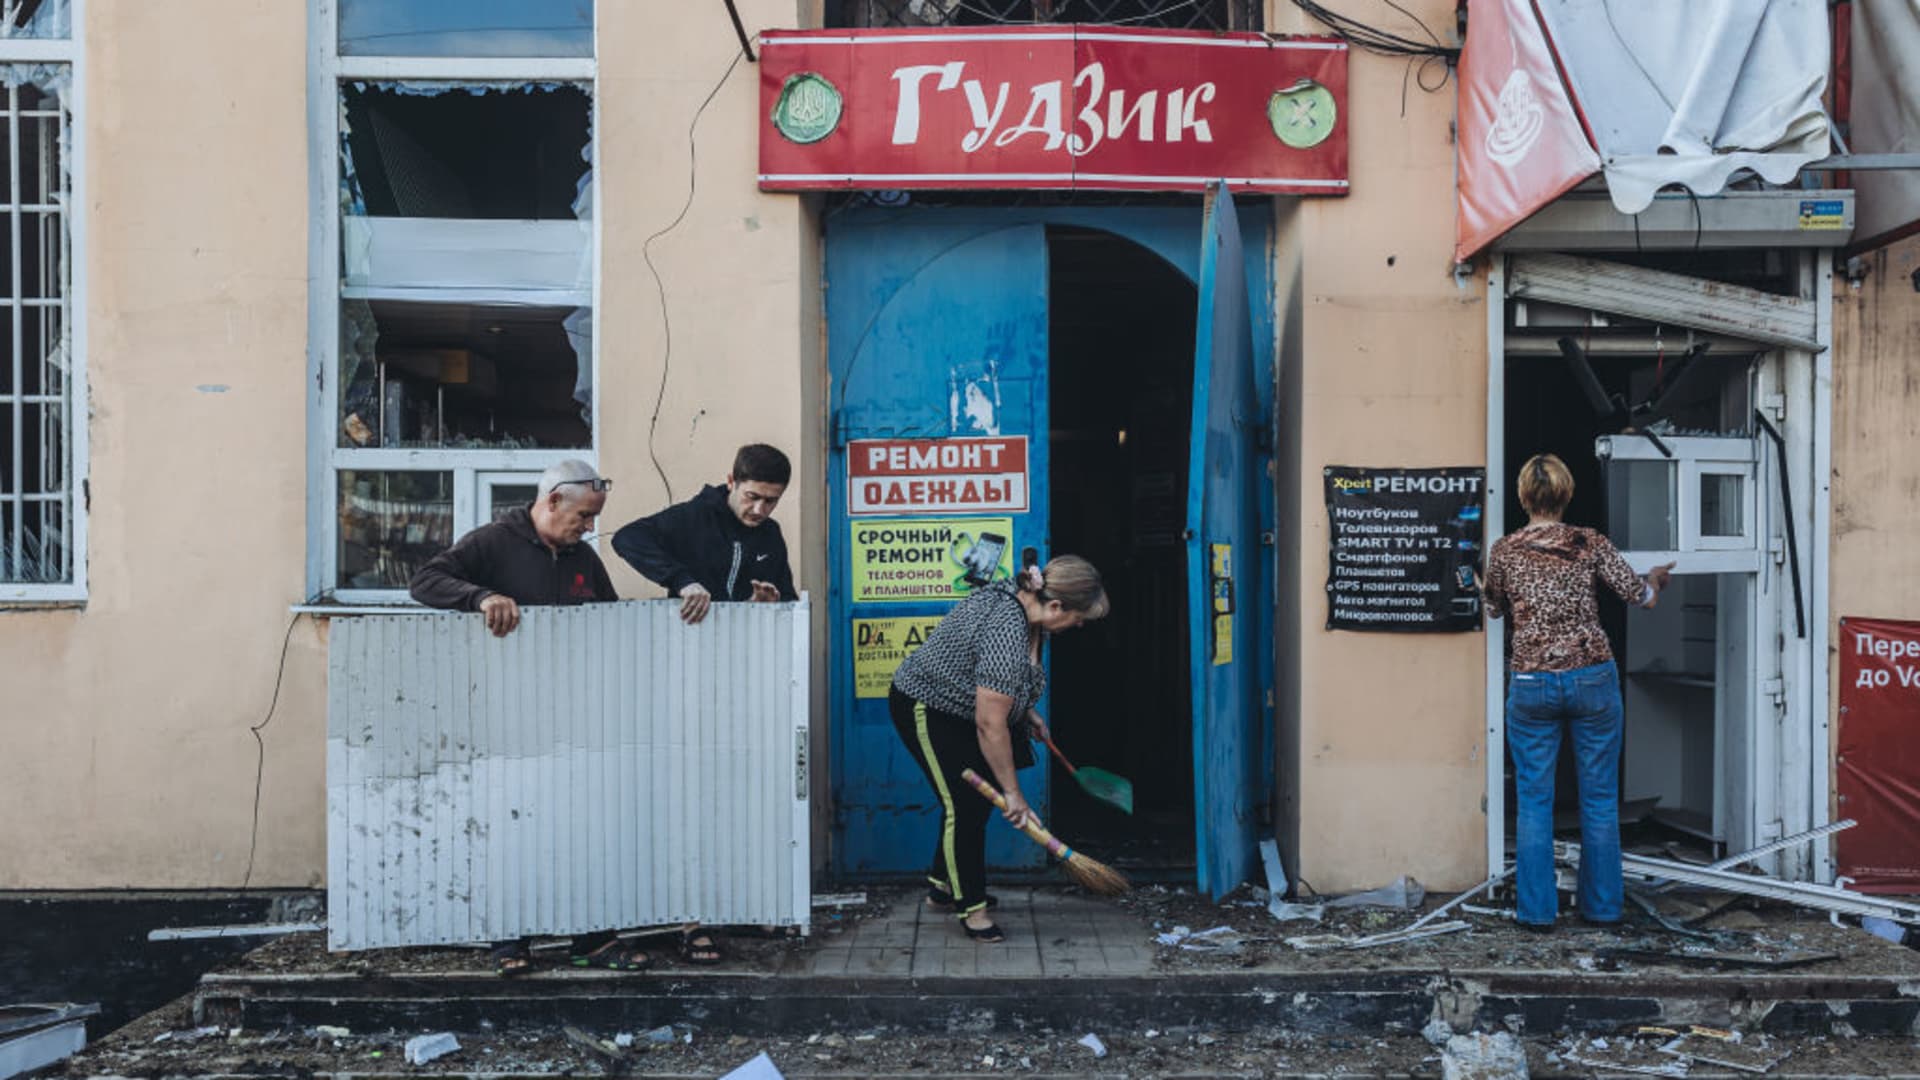 Locals clean the entrance to their shop at the Bakhmut market after it was shelled by the Russian army, in the city of Bakhmut, Donetsk Oblast of Ukraine on July 21, 2022.